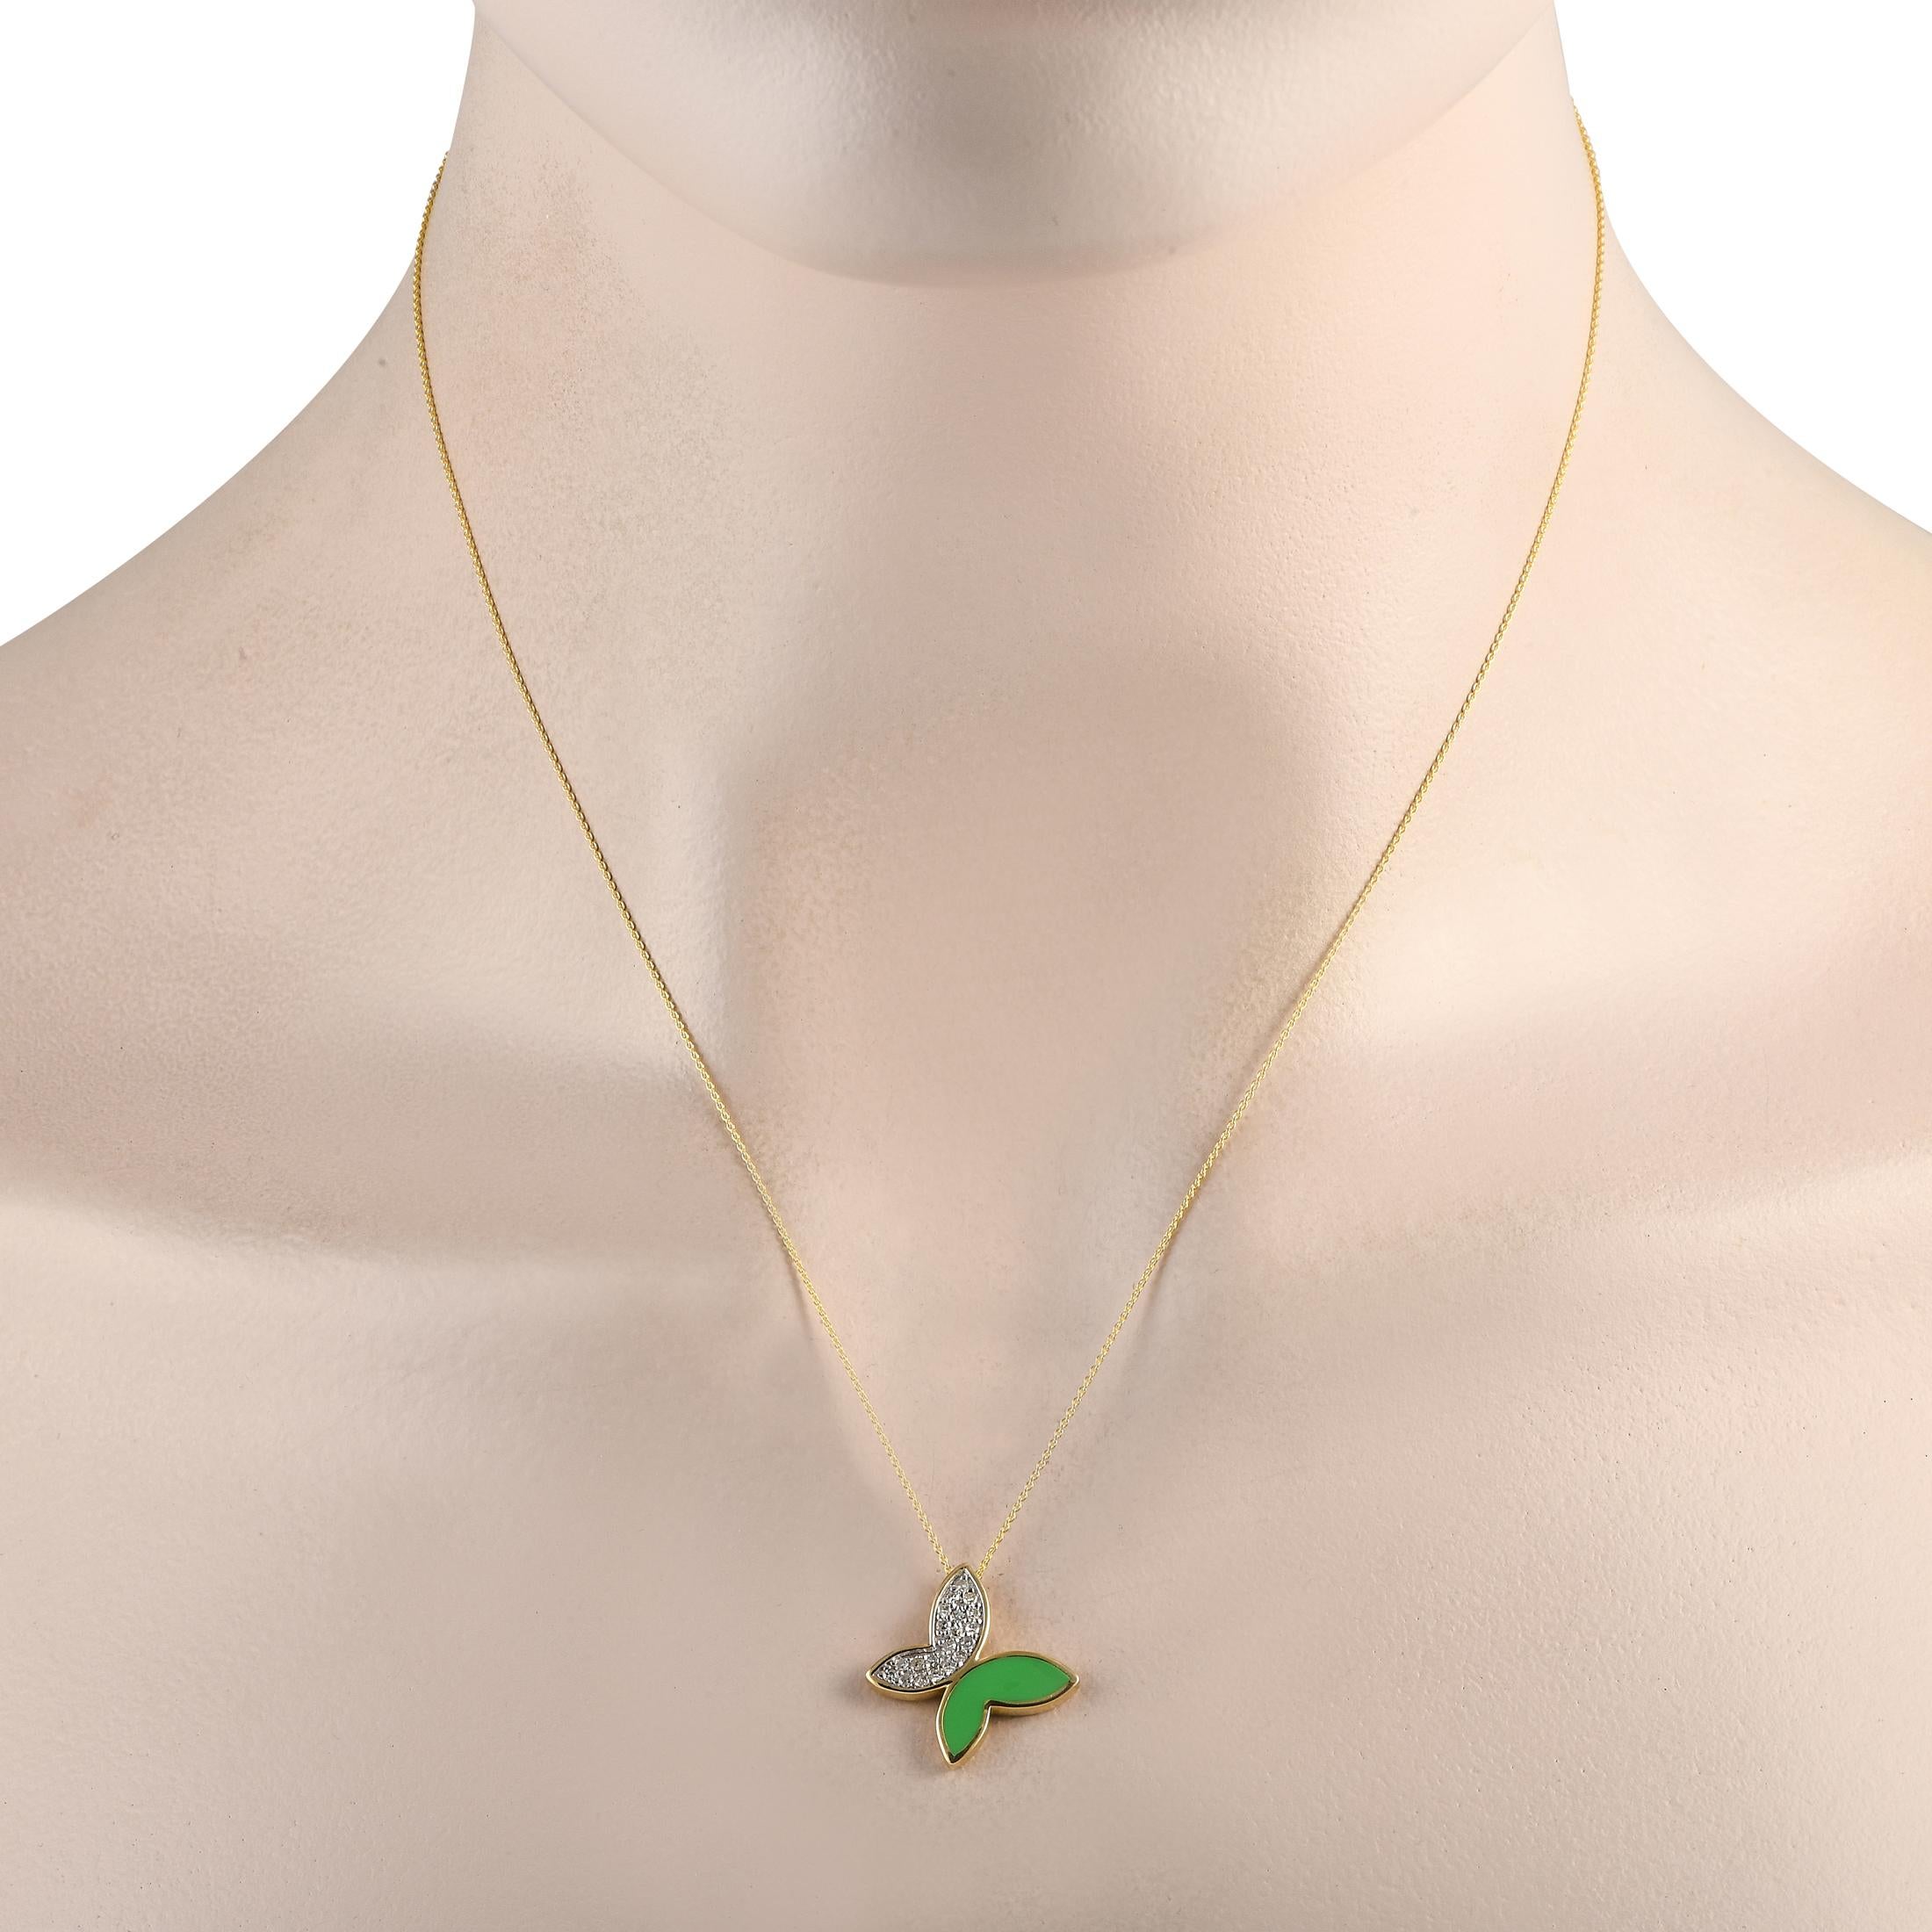 Inset Diamonds totaling 0.15 carats and a brilliant green inlaid accent make this 14K Yellow Gold necklace impossible to ignore. Charming and elegant, the butterfly shaped pendant measures 0.75 round and is suspended from a delicate 18 chain.This